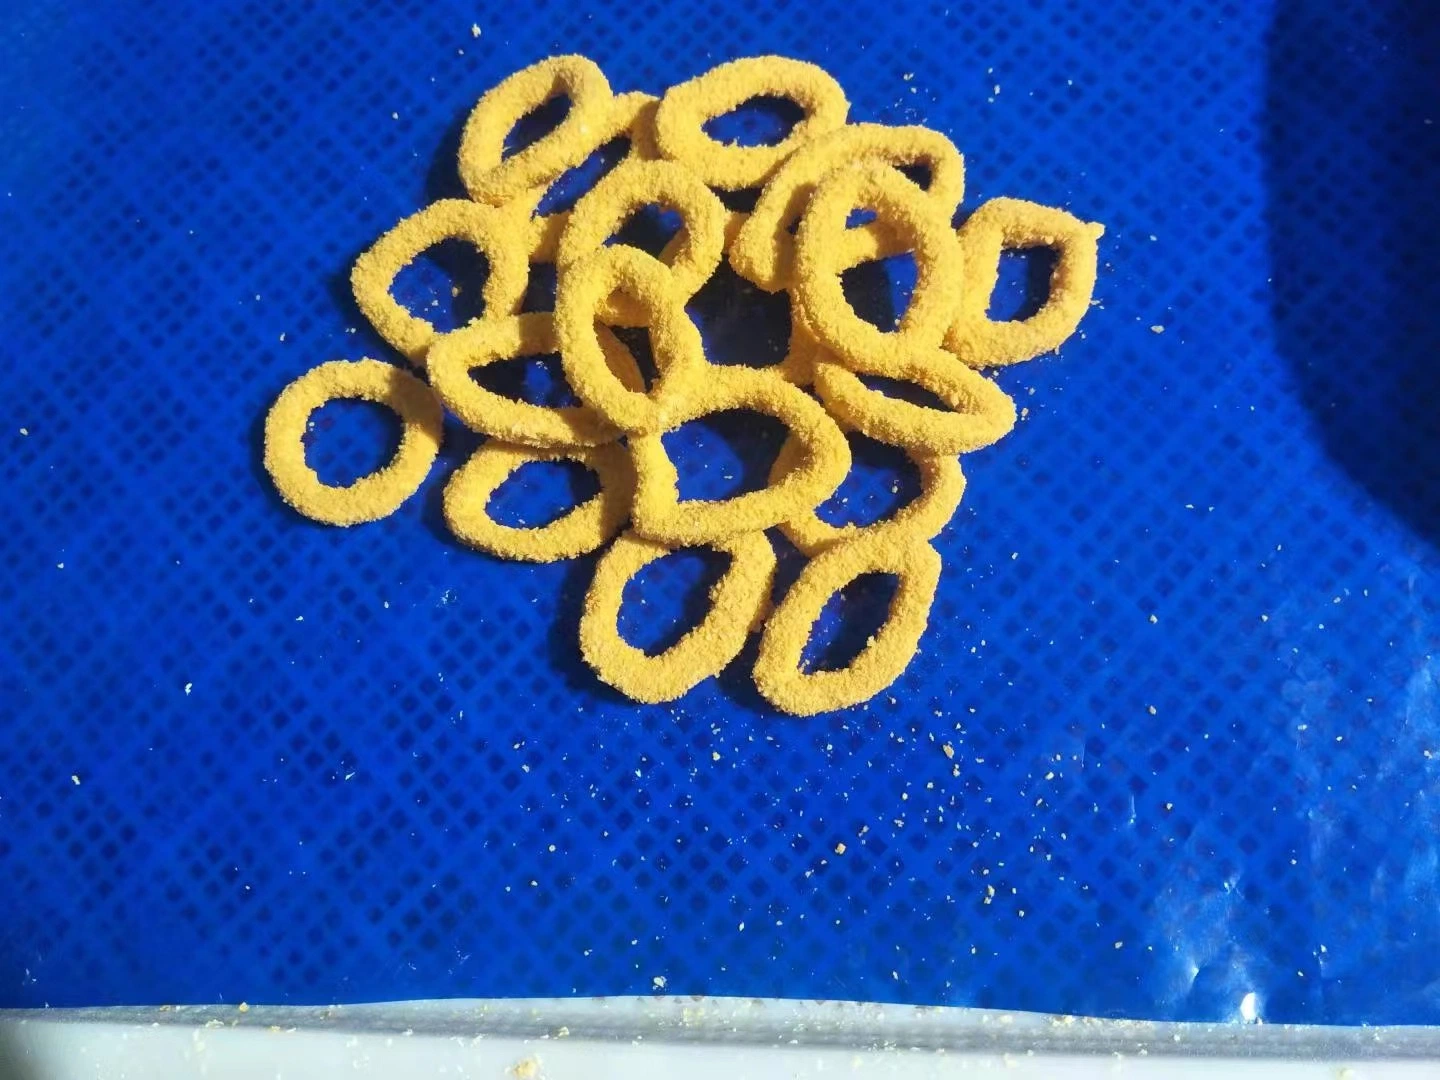 Frozen Delicious Seafood Factory Supply Breaded/Fried Squid/Calamari Rings